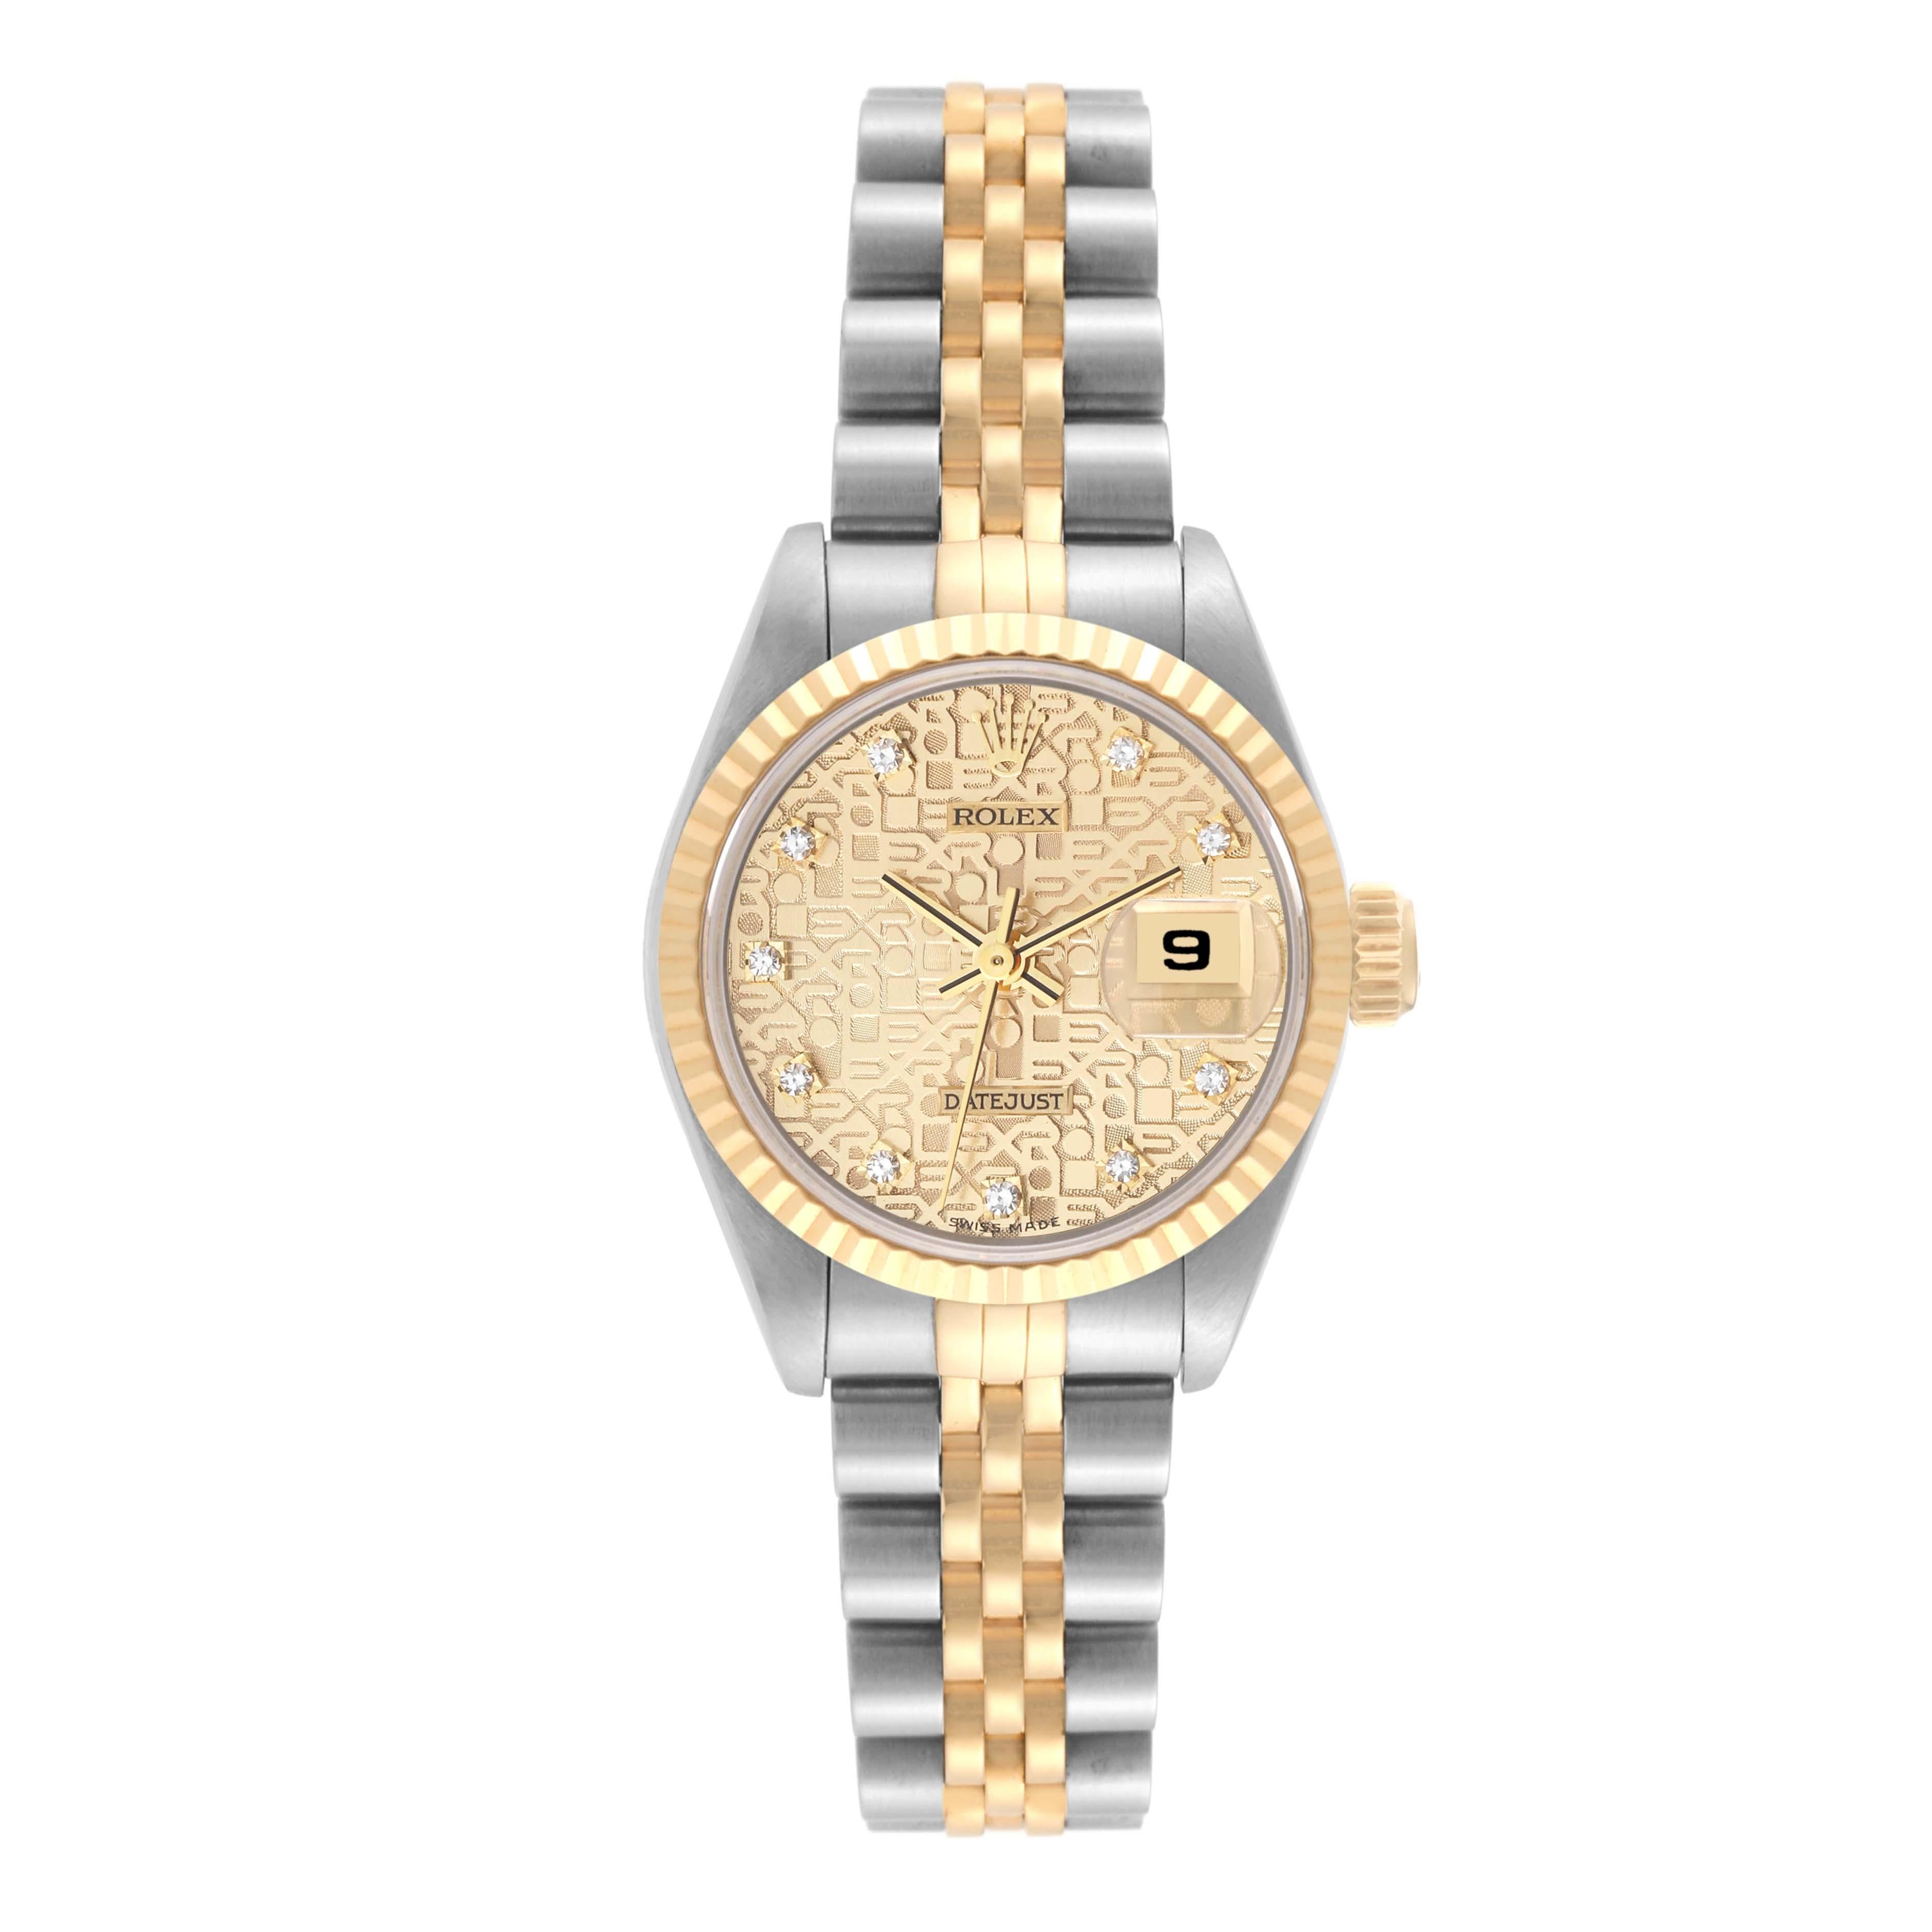 Rolex Datejust Anniversary Diamond Dial Steel Yellow Gold Ladies Watch 69173. Officially certified chronometer automatic self-winding movement. Stainless steel oyster case 26.0 mm in diameter. Rolex logo on the crown. 18k yellow gold fluted bezel.